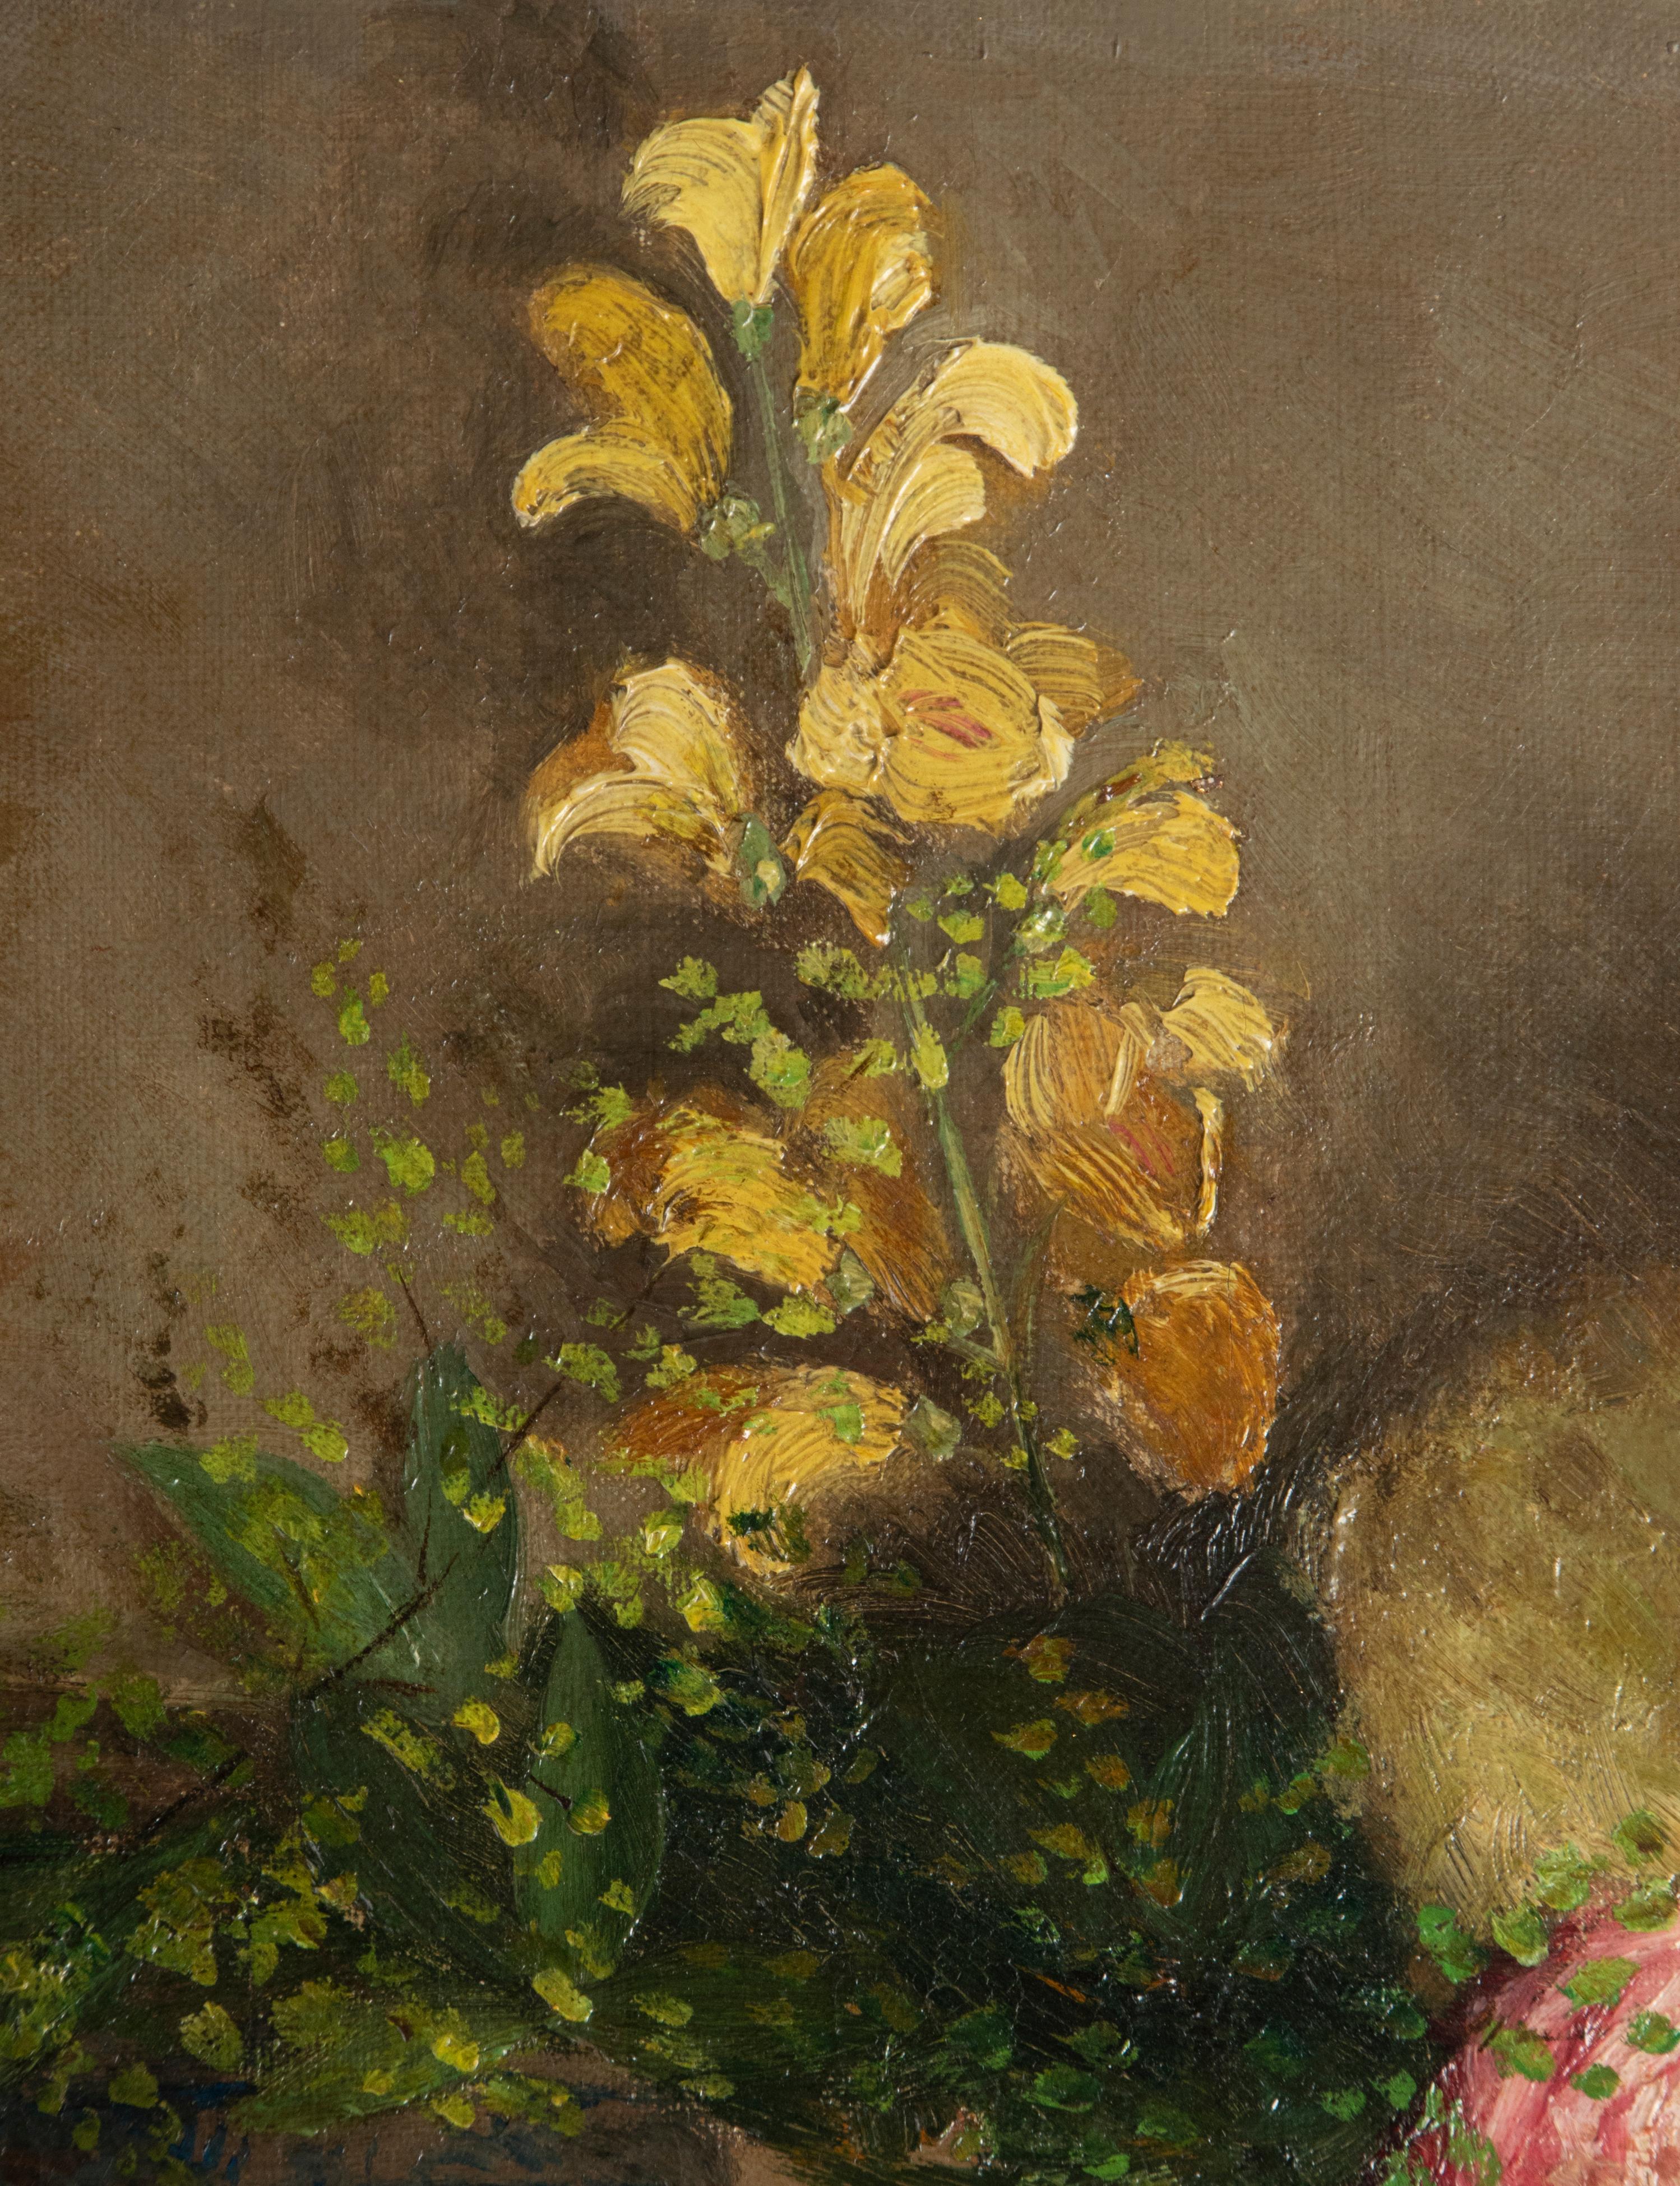 19th Century Flower Still Life Painting Oil on Canvas by M. Herwyn 2